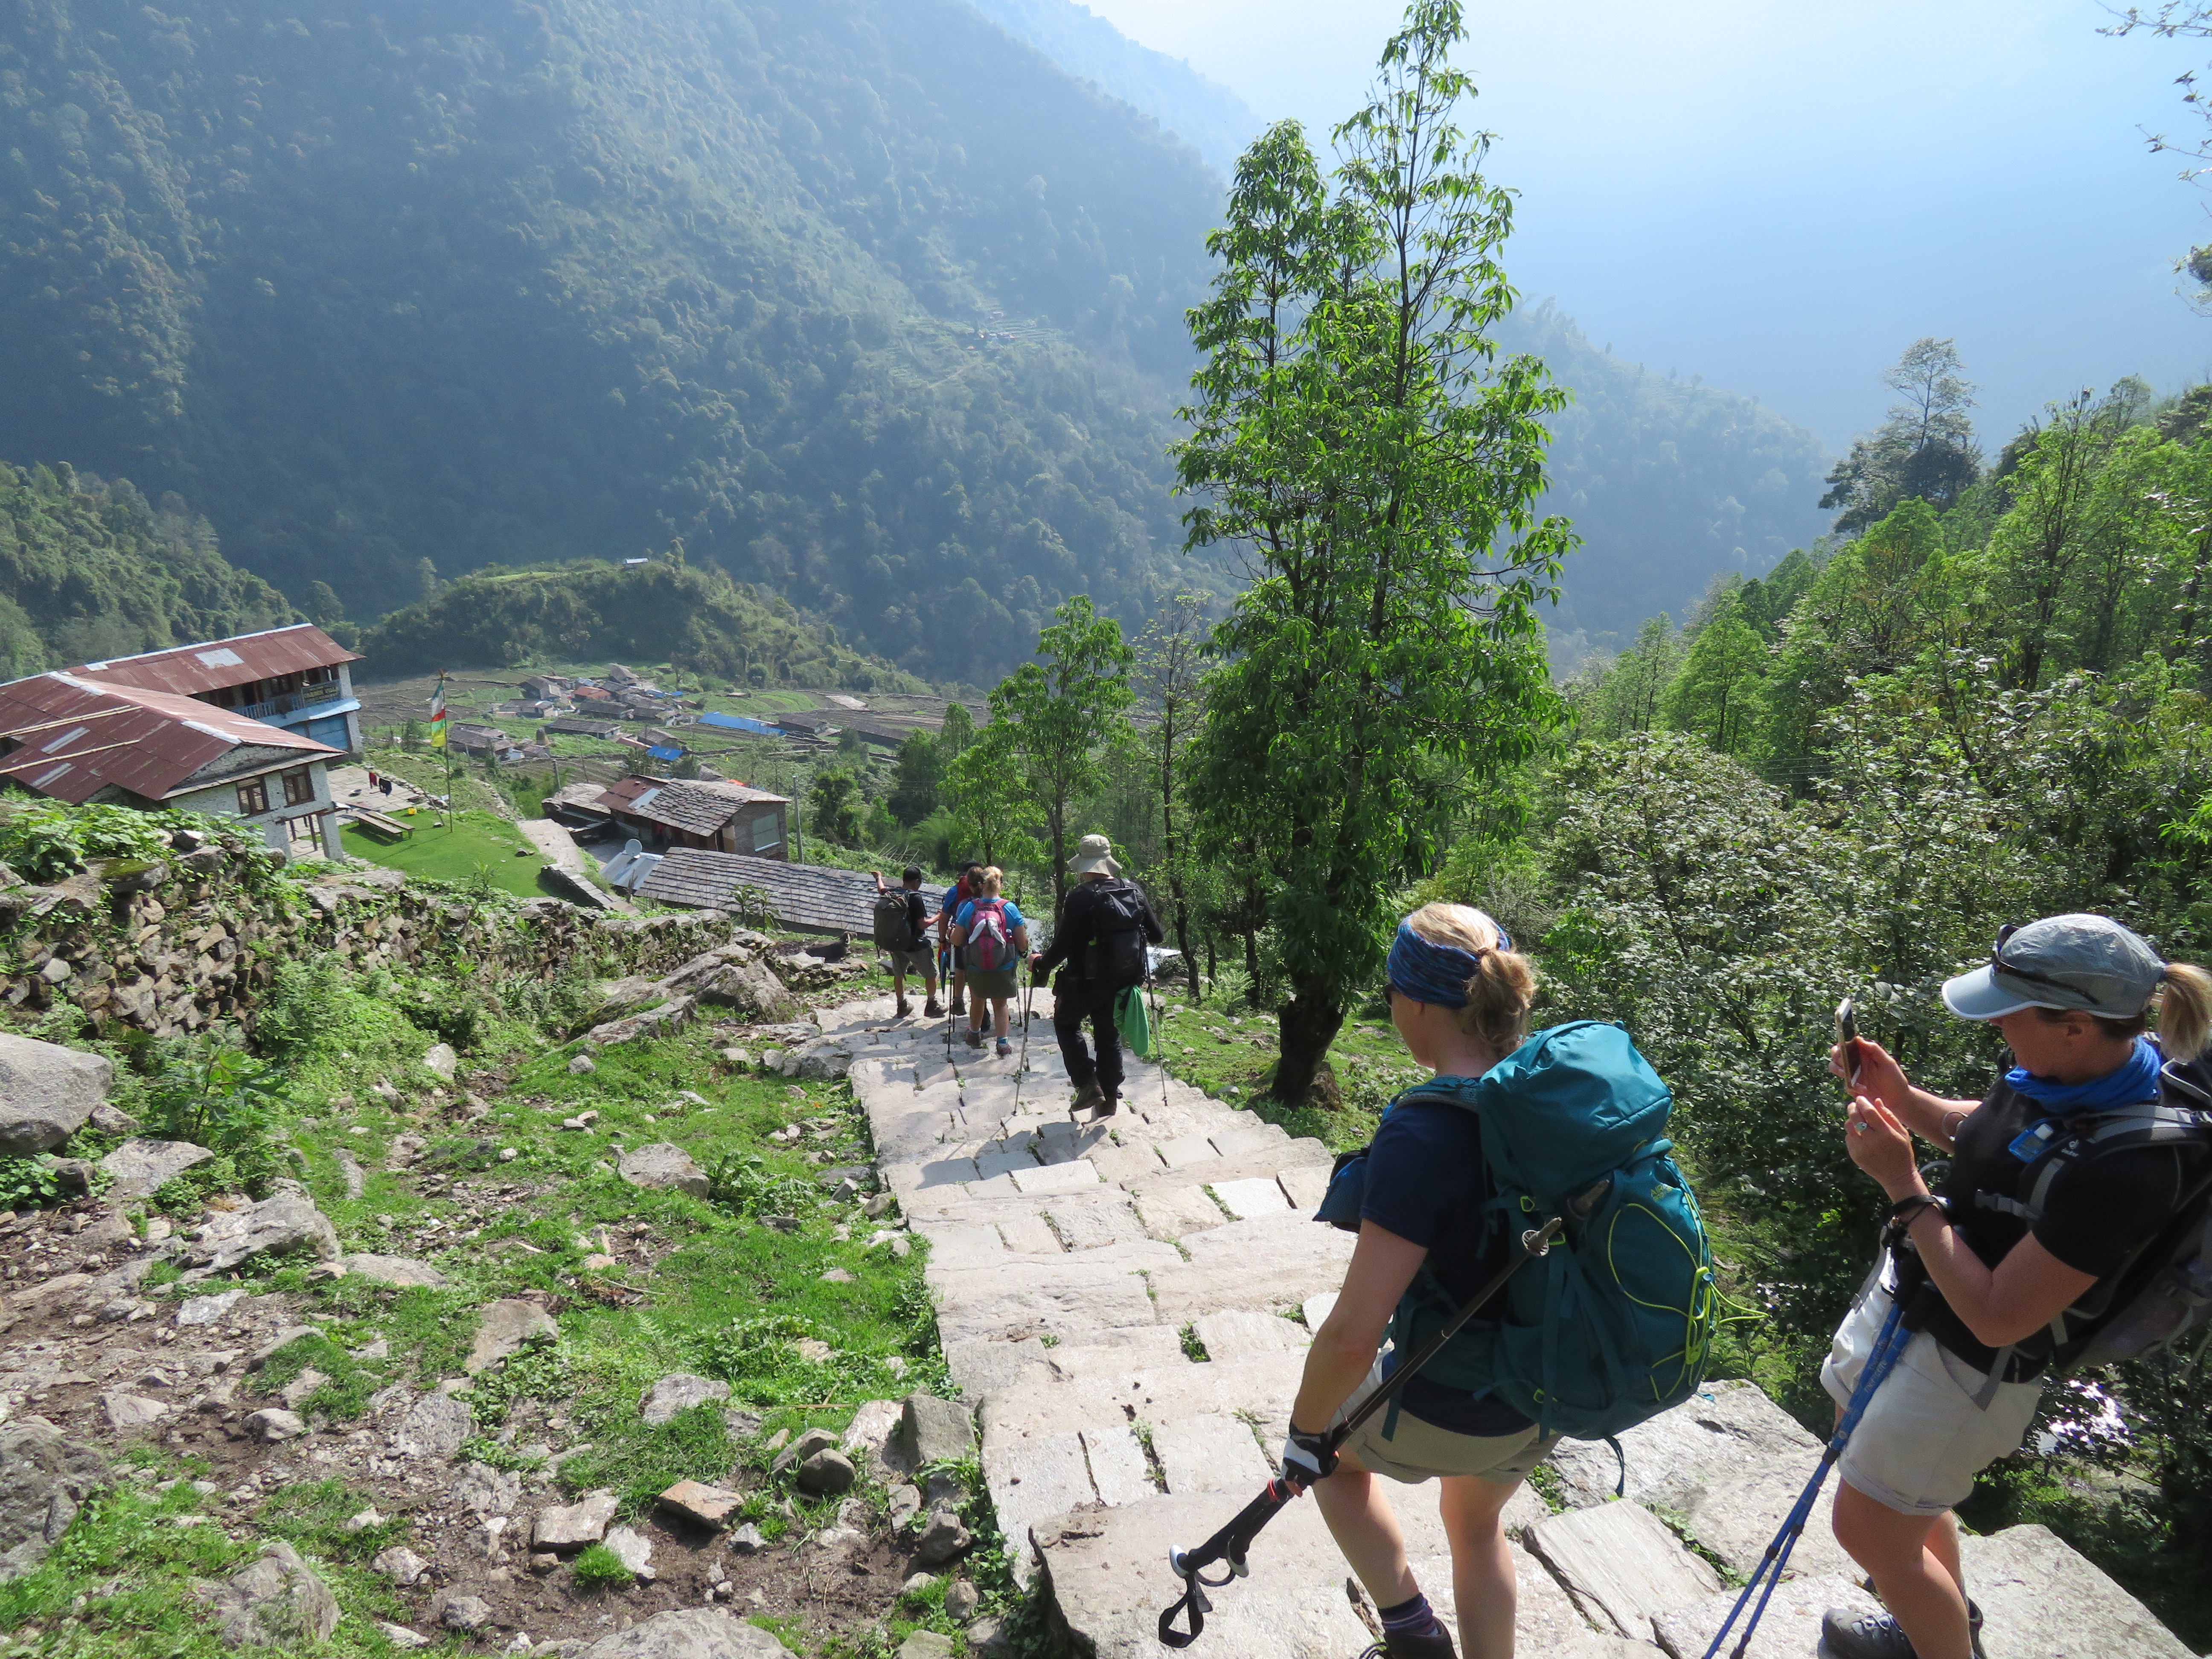 Some of the Stairs on the Annapurna Base Camp Trek